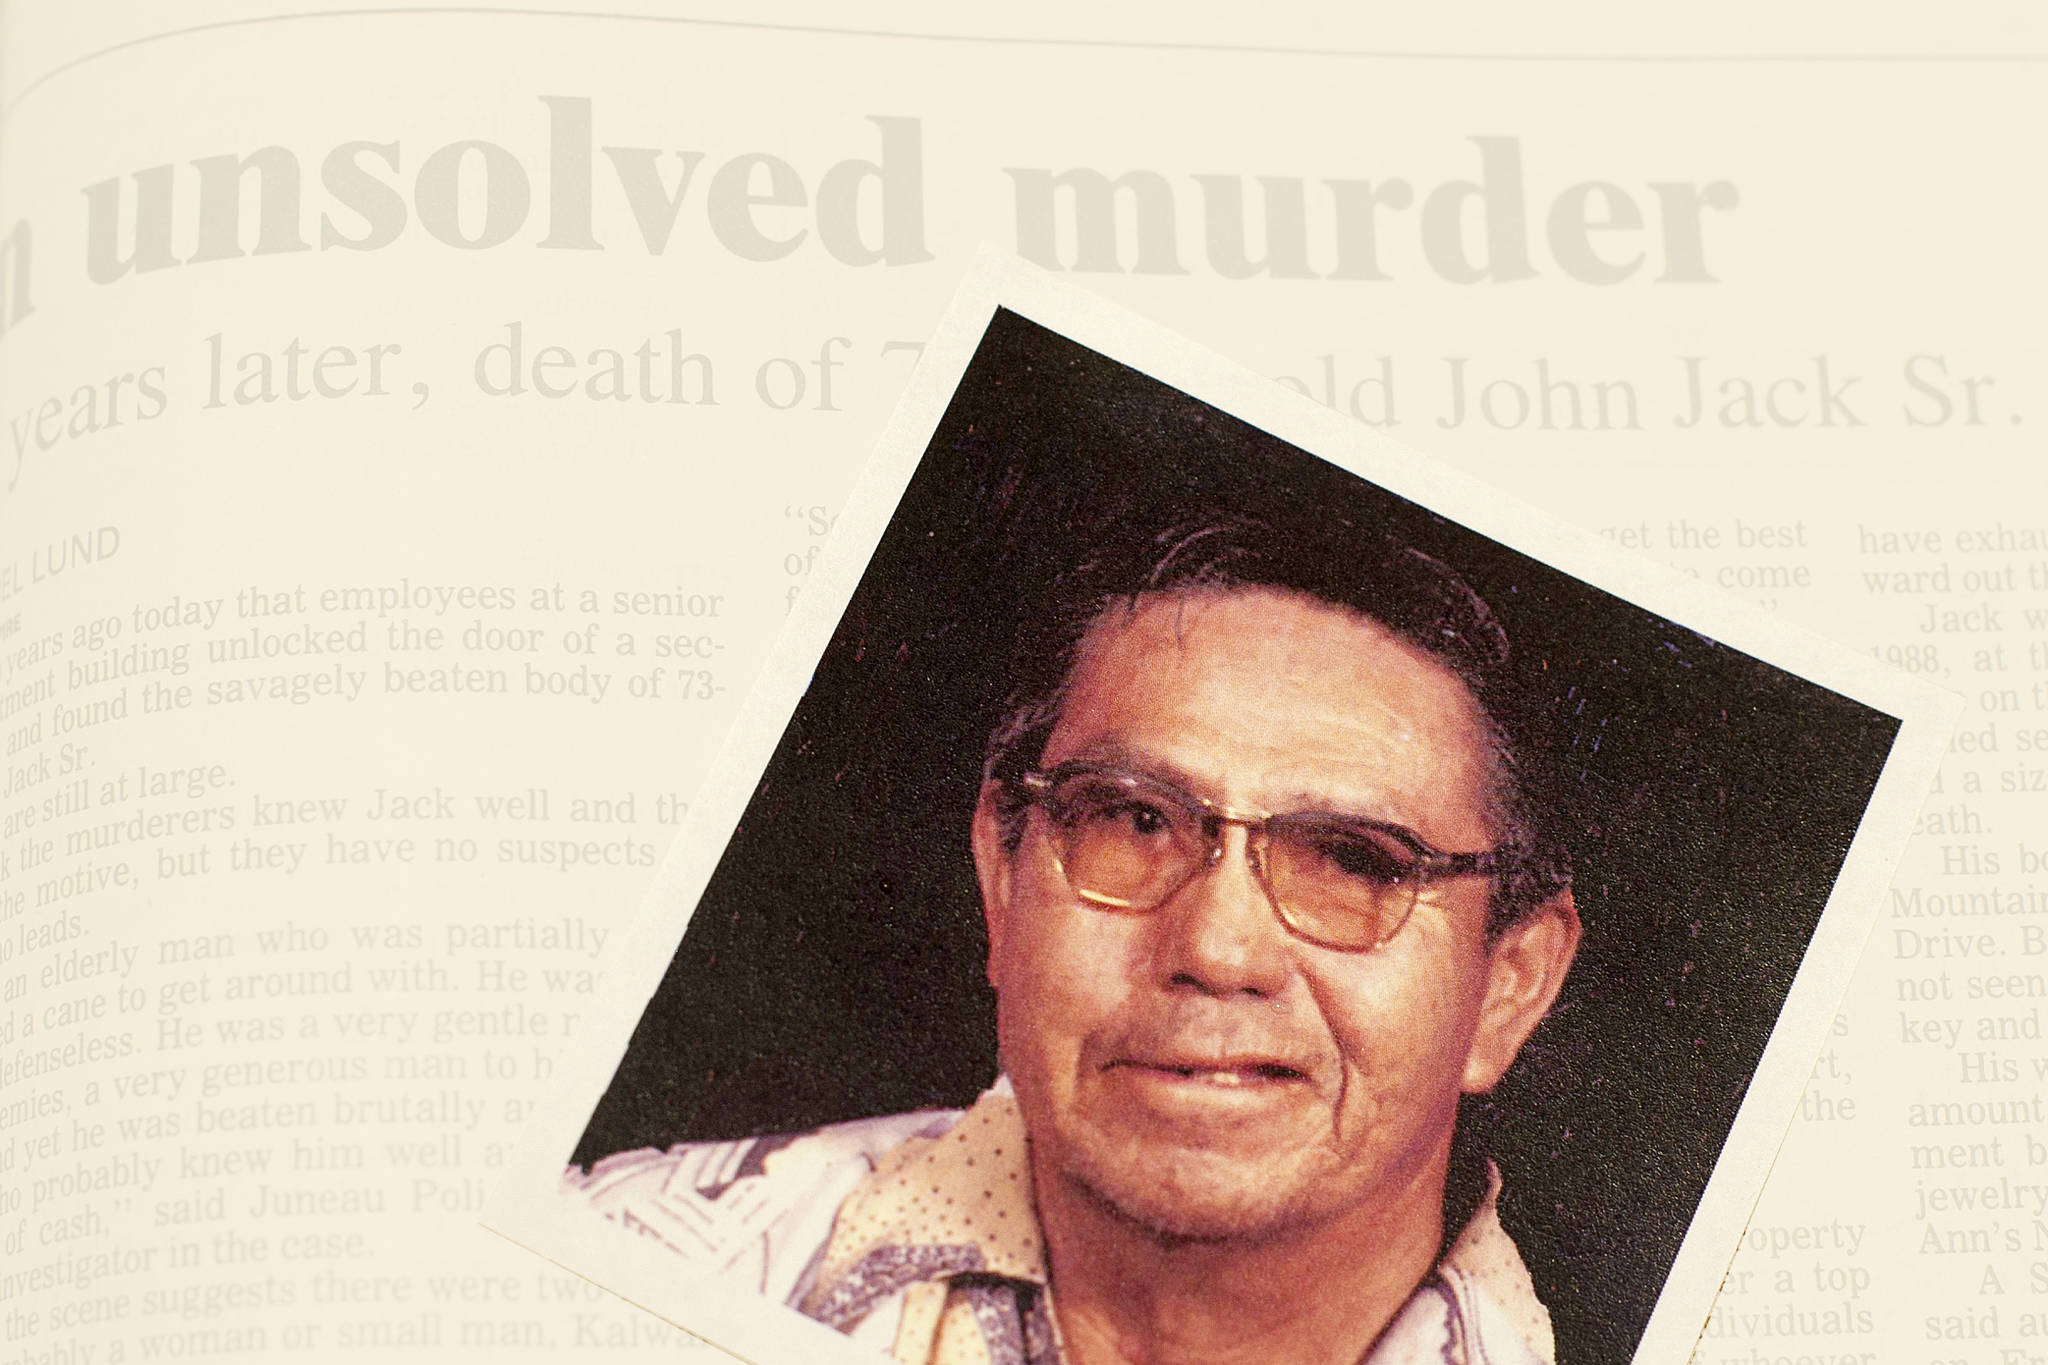 John Jack, Sr. was found dead in his apartment on Oct. 17, 1988. Thirty years later, his killer or killers have not been found. (Photo illustration by Michael Penn | Juneau Empire)